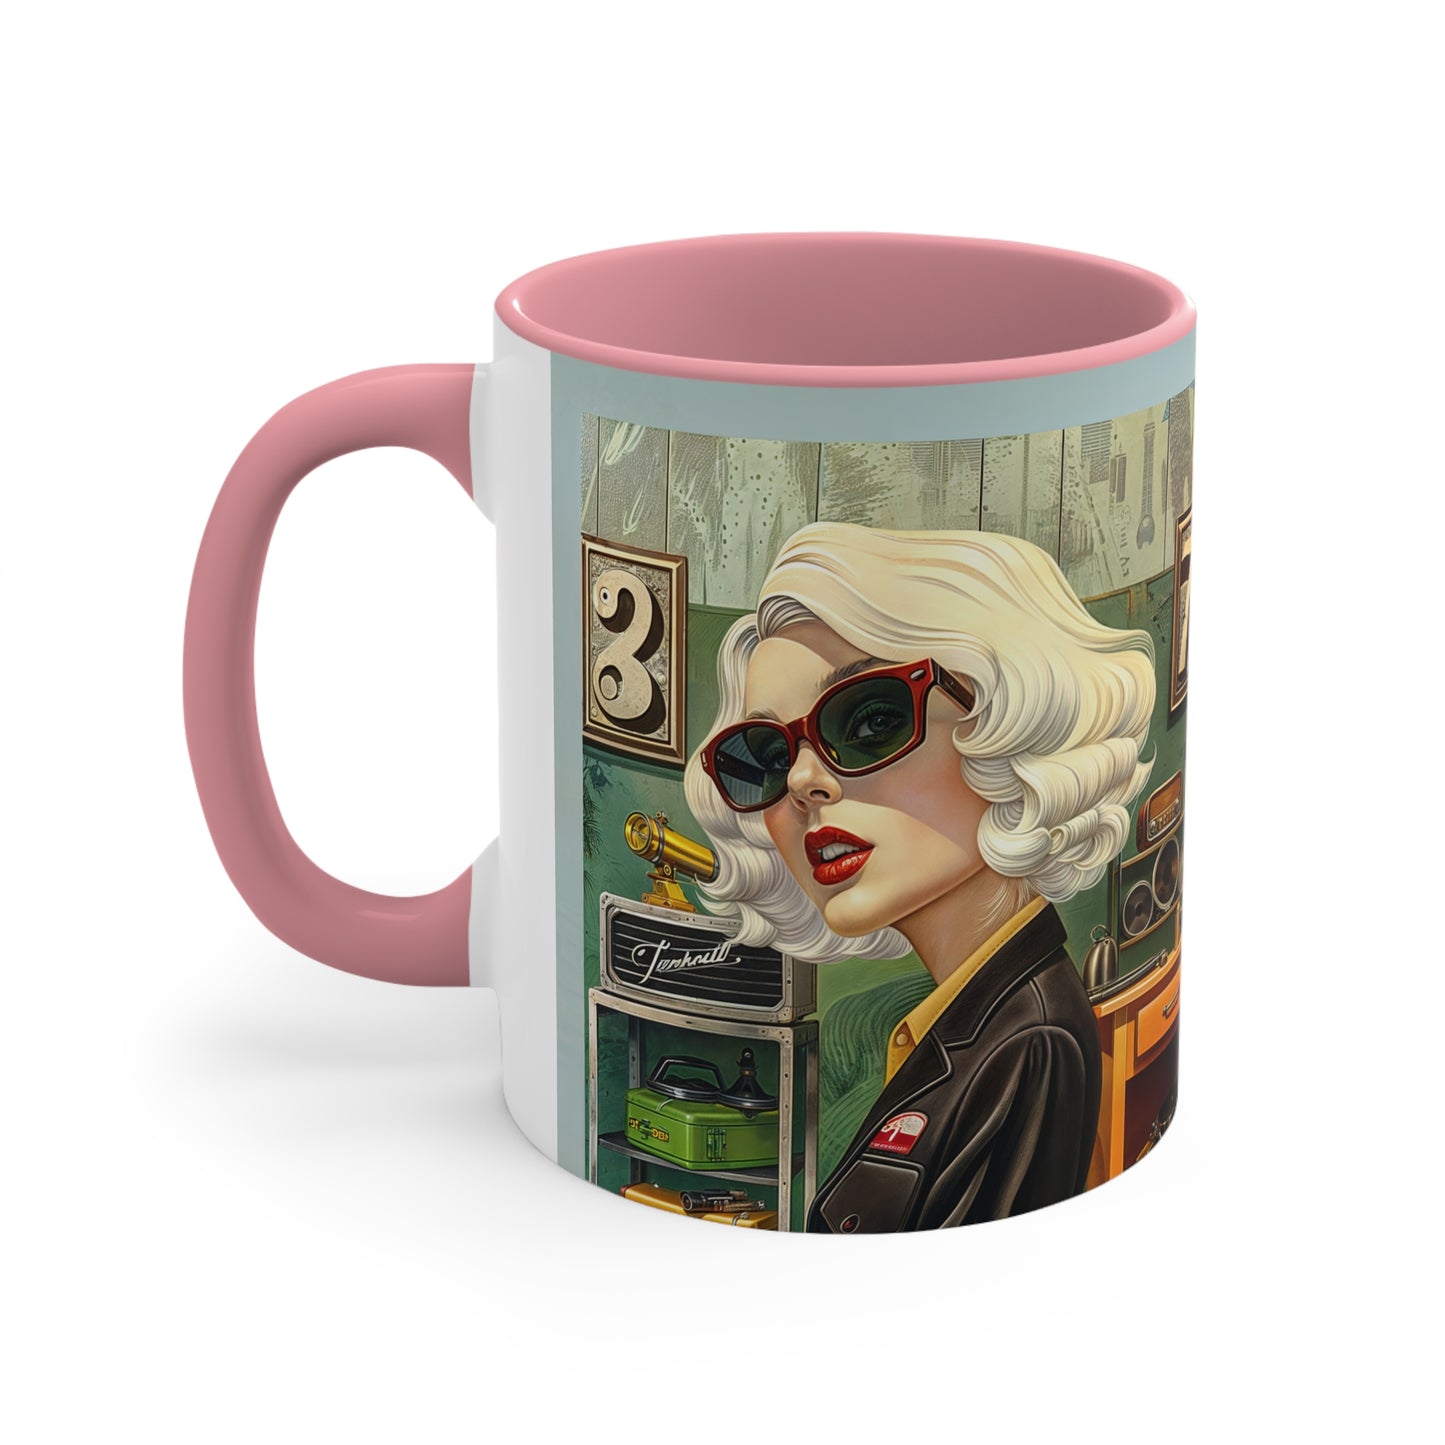 Accent Coffee Mug, 11oz - Tool Time Blonde-pink side